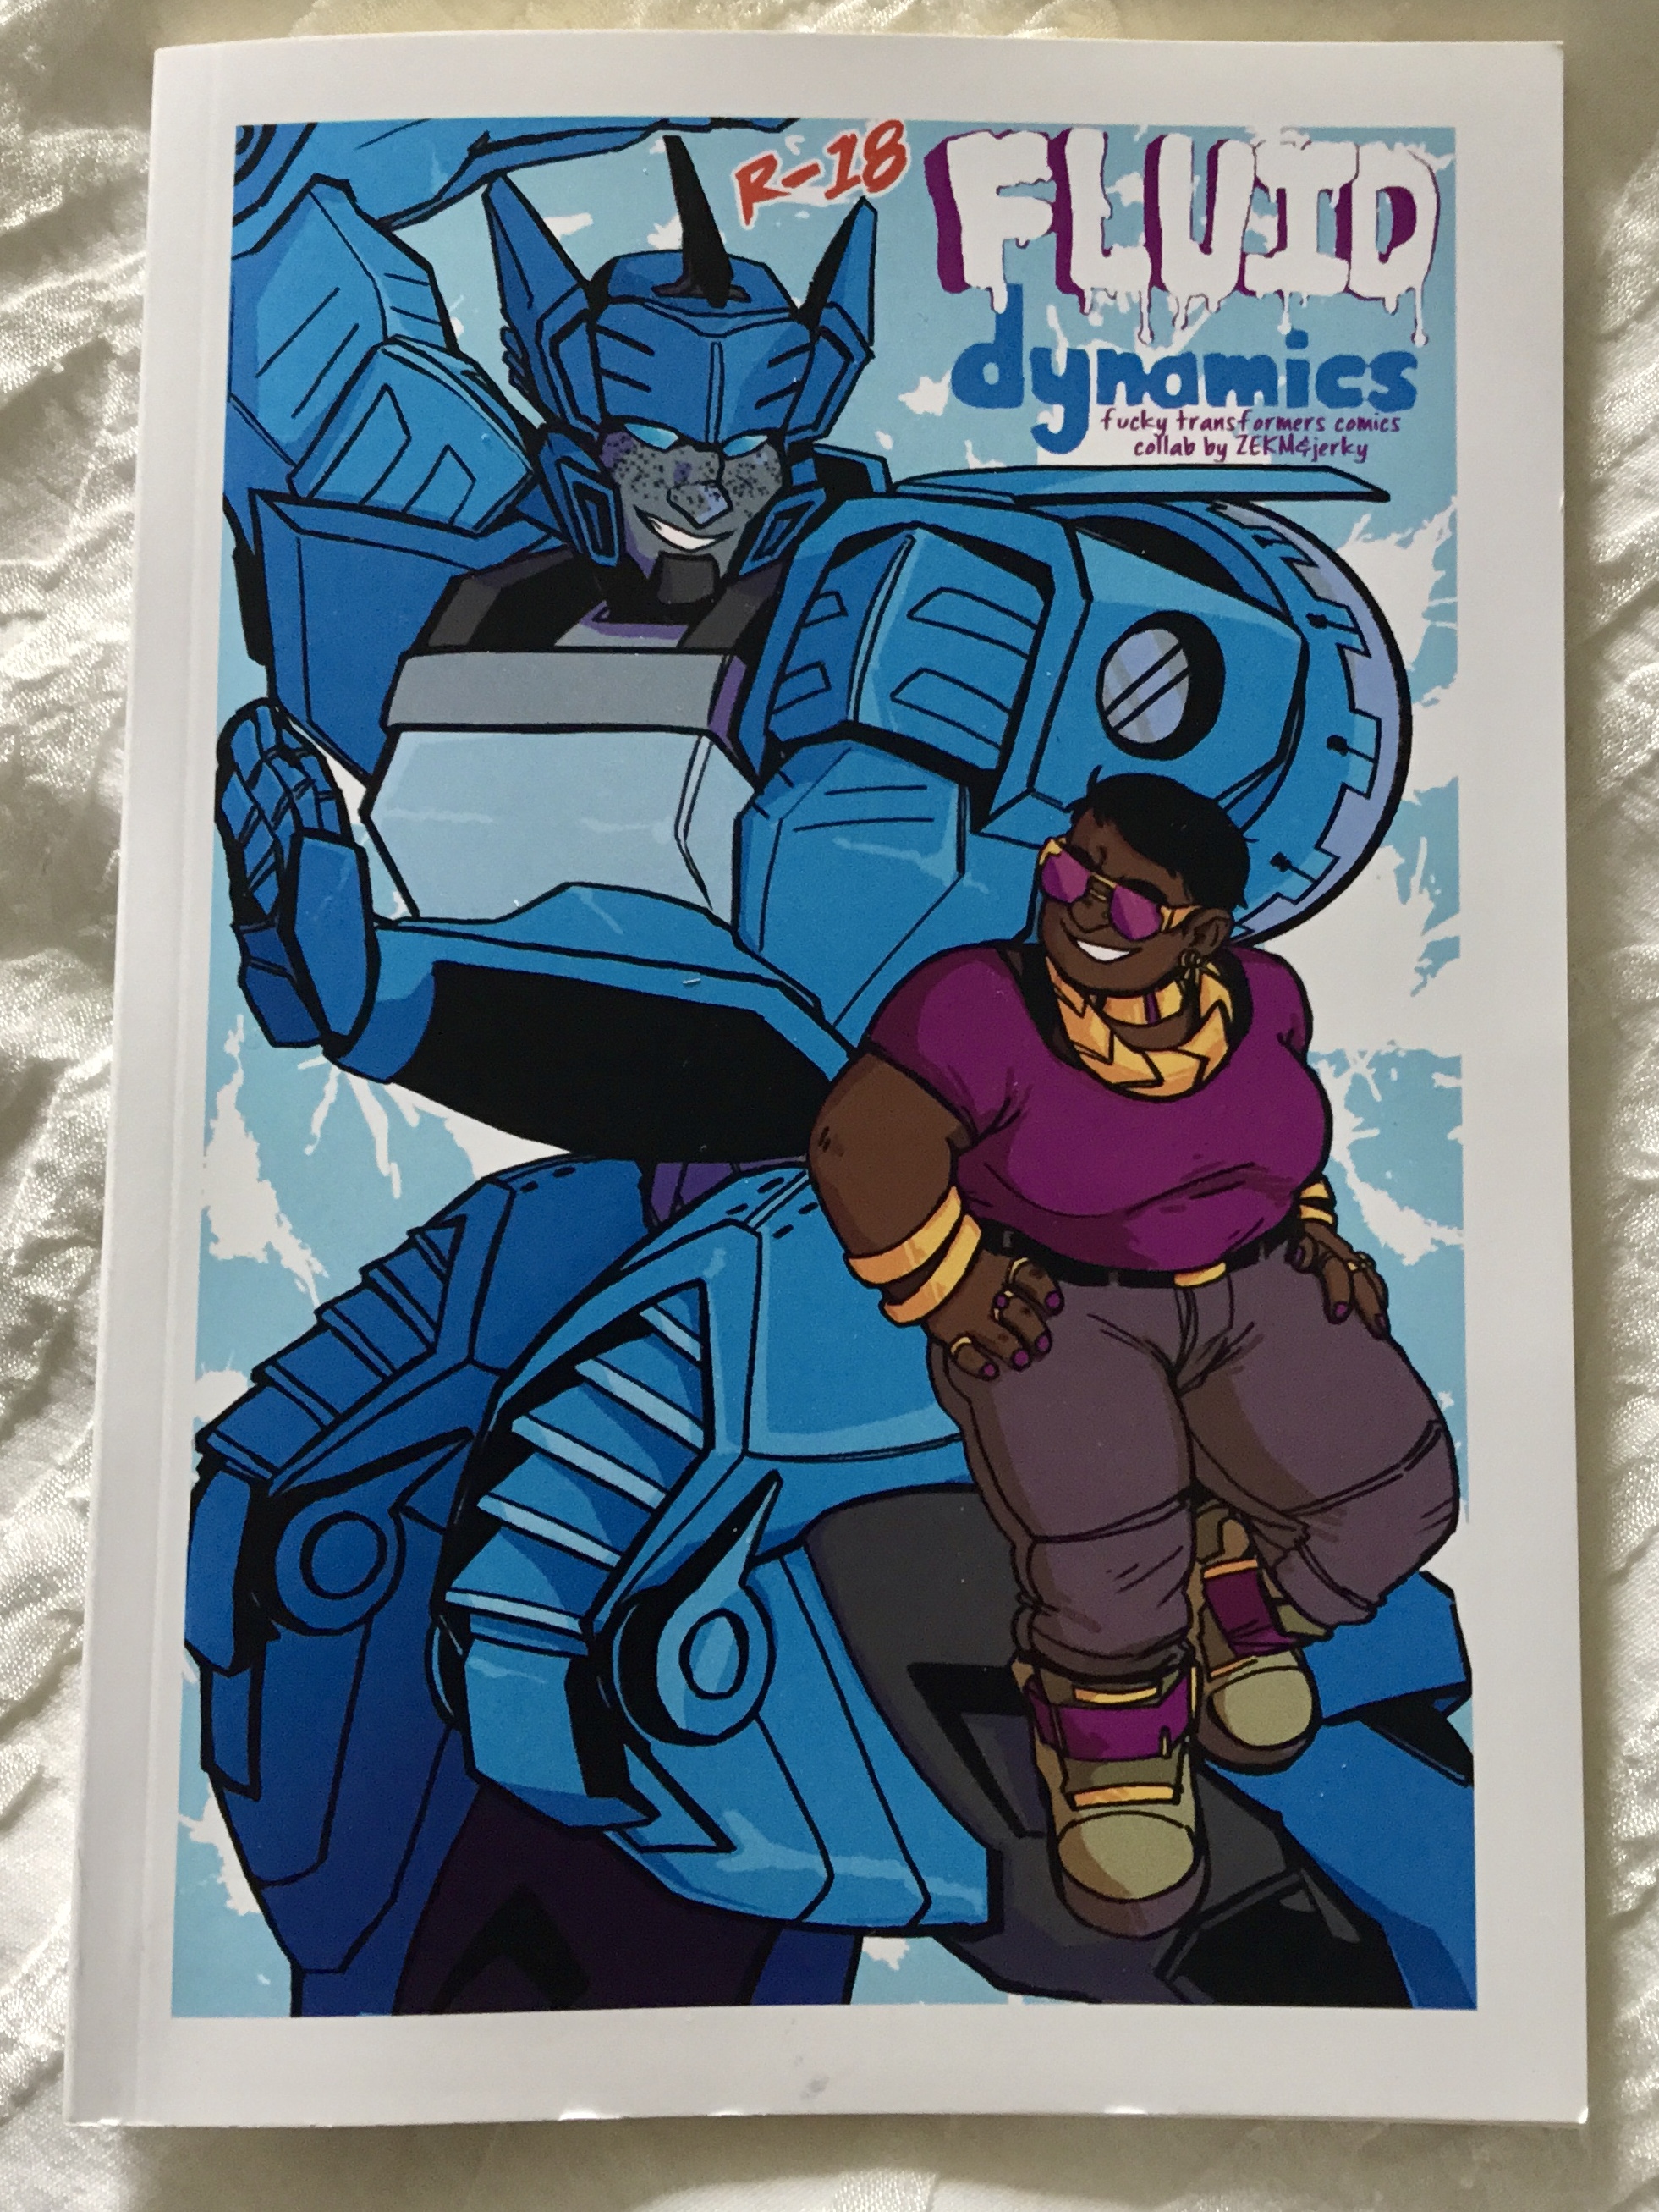 Blurr and human Swindle. Blurr is a blue robot and Swindle is dark skinned in a purple top